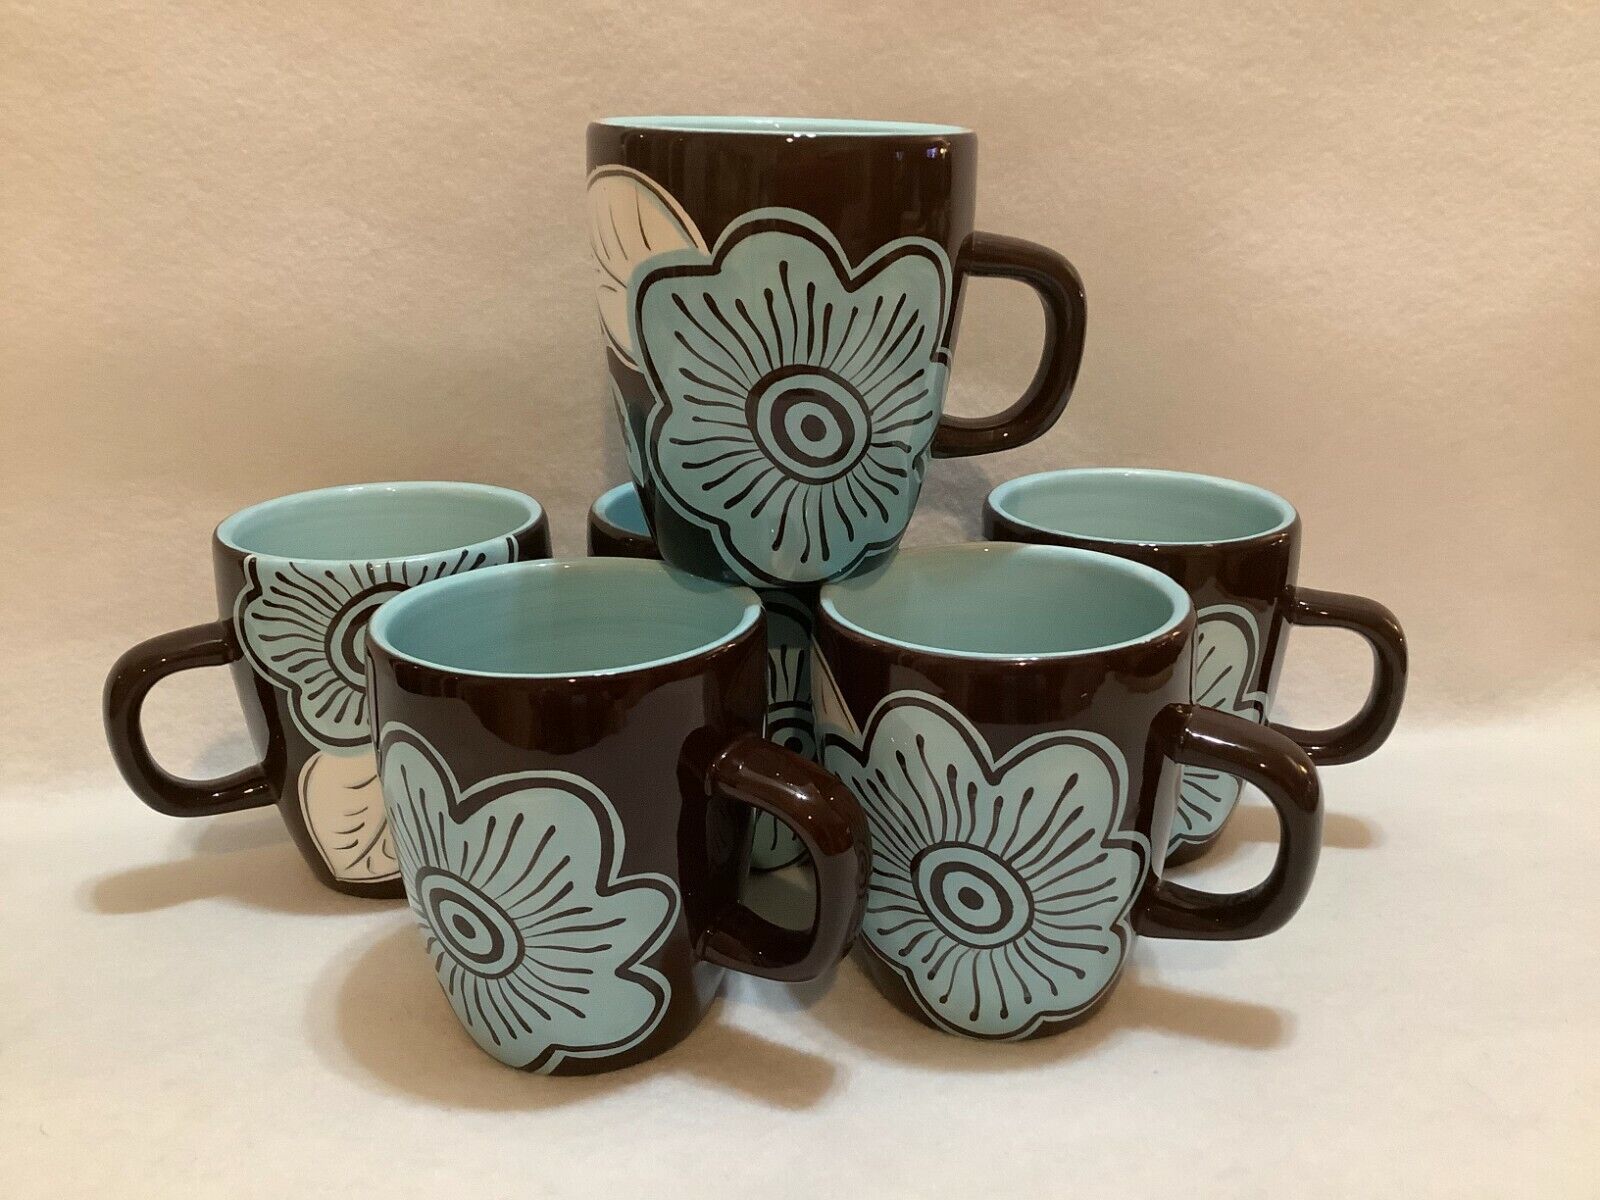 Gates Ware Coffee Cups by Laurie Gates, Set of 6